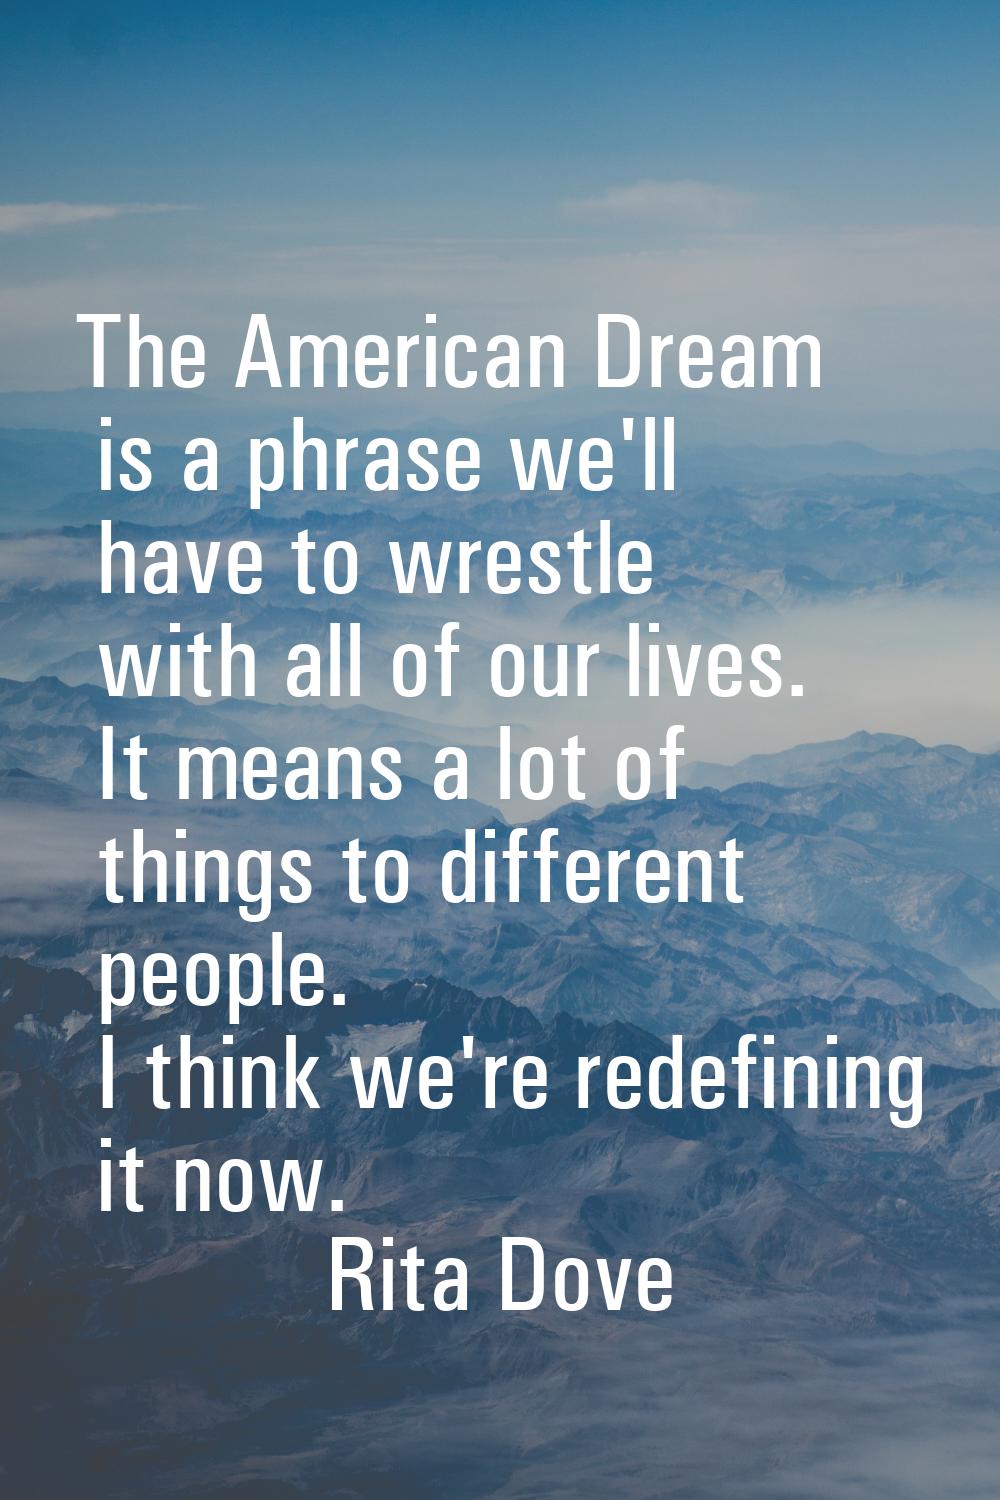 The American Dream is a phrase we'll have to wrestle with all of our lives. It means a lot of thing